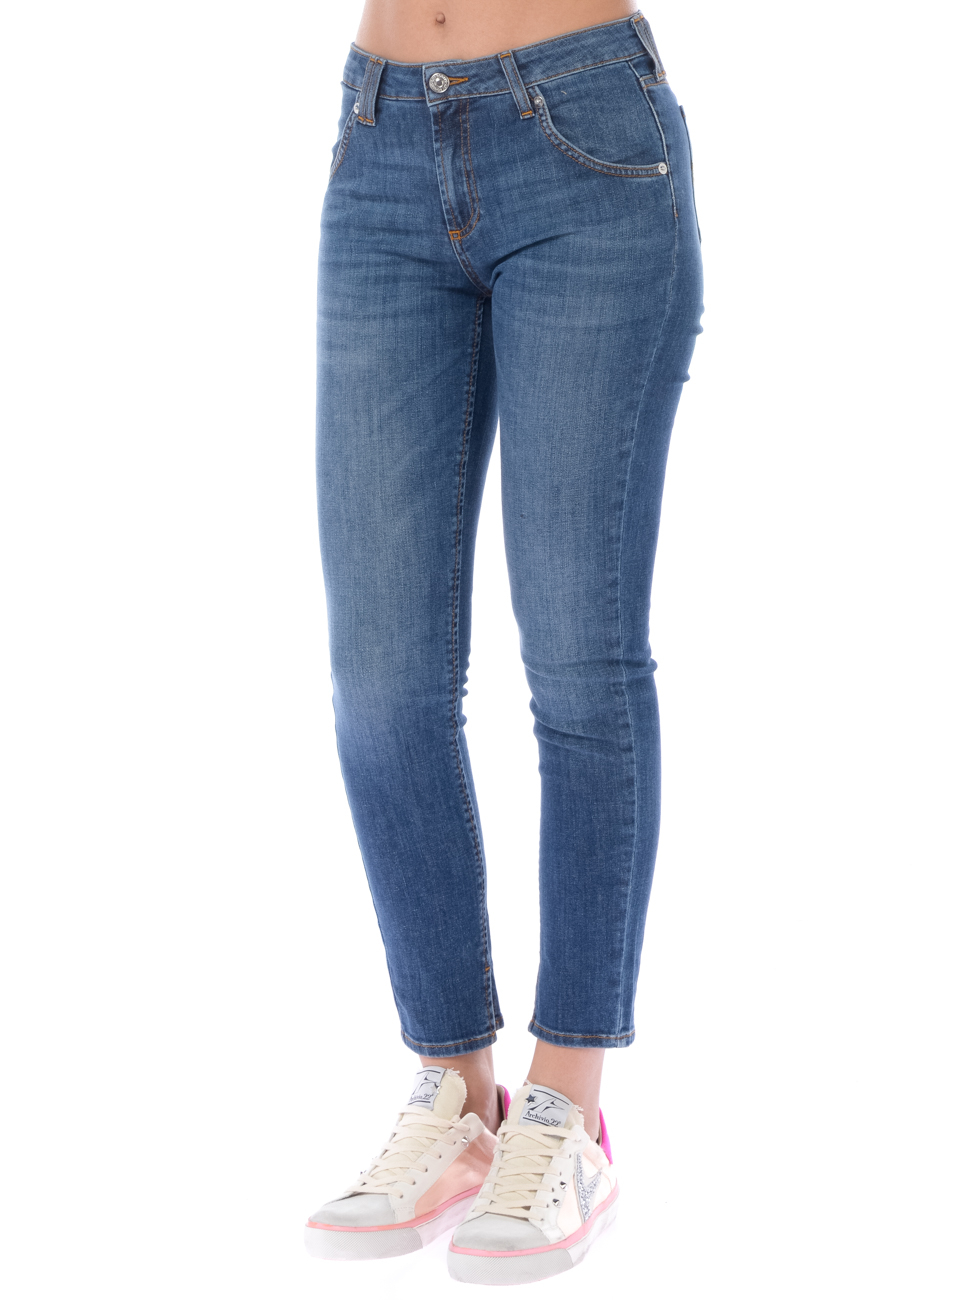 jeans da donna Roy Roger's skinny stone washed